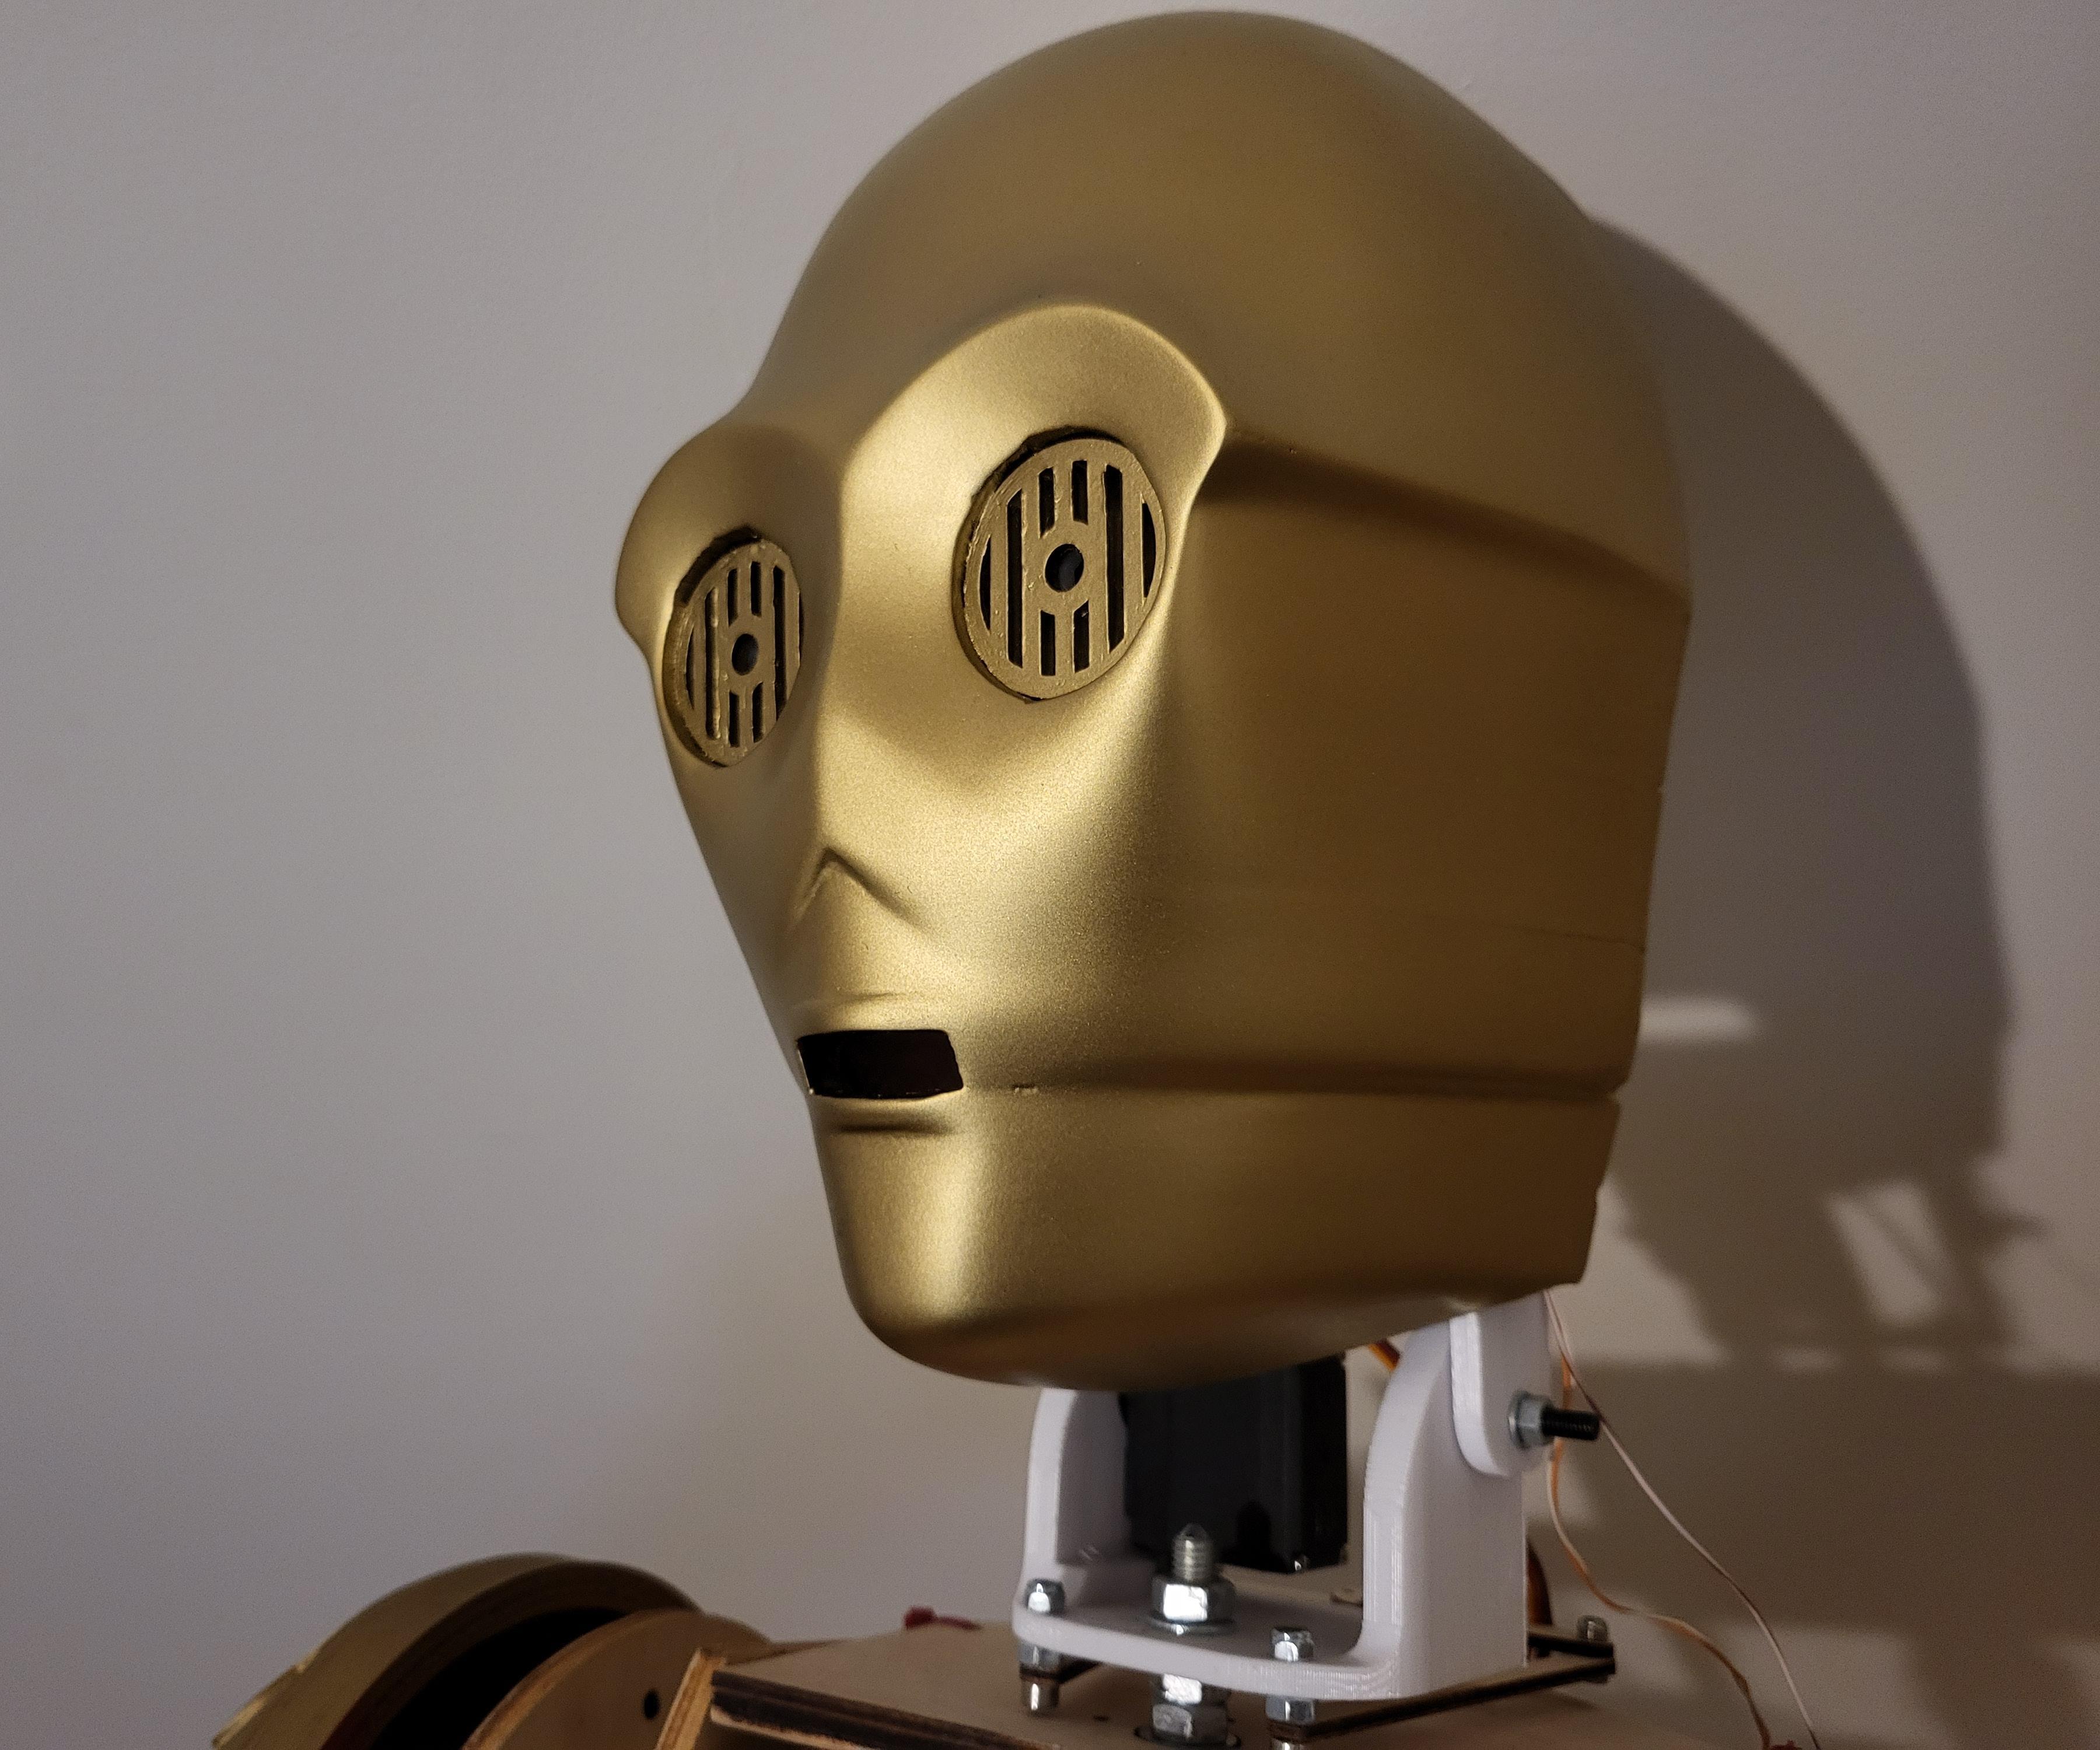 C3PO - Humanoid Movable Robot - Let's Doing One Part of Them.